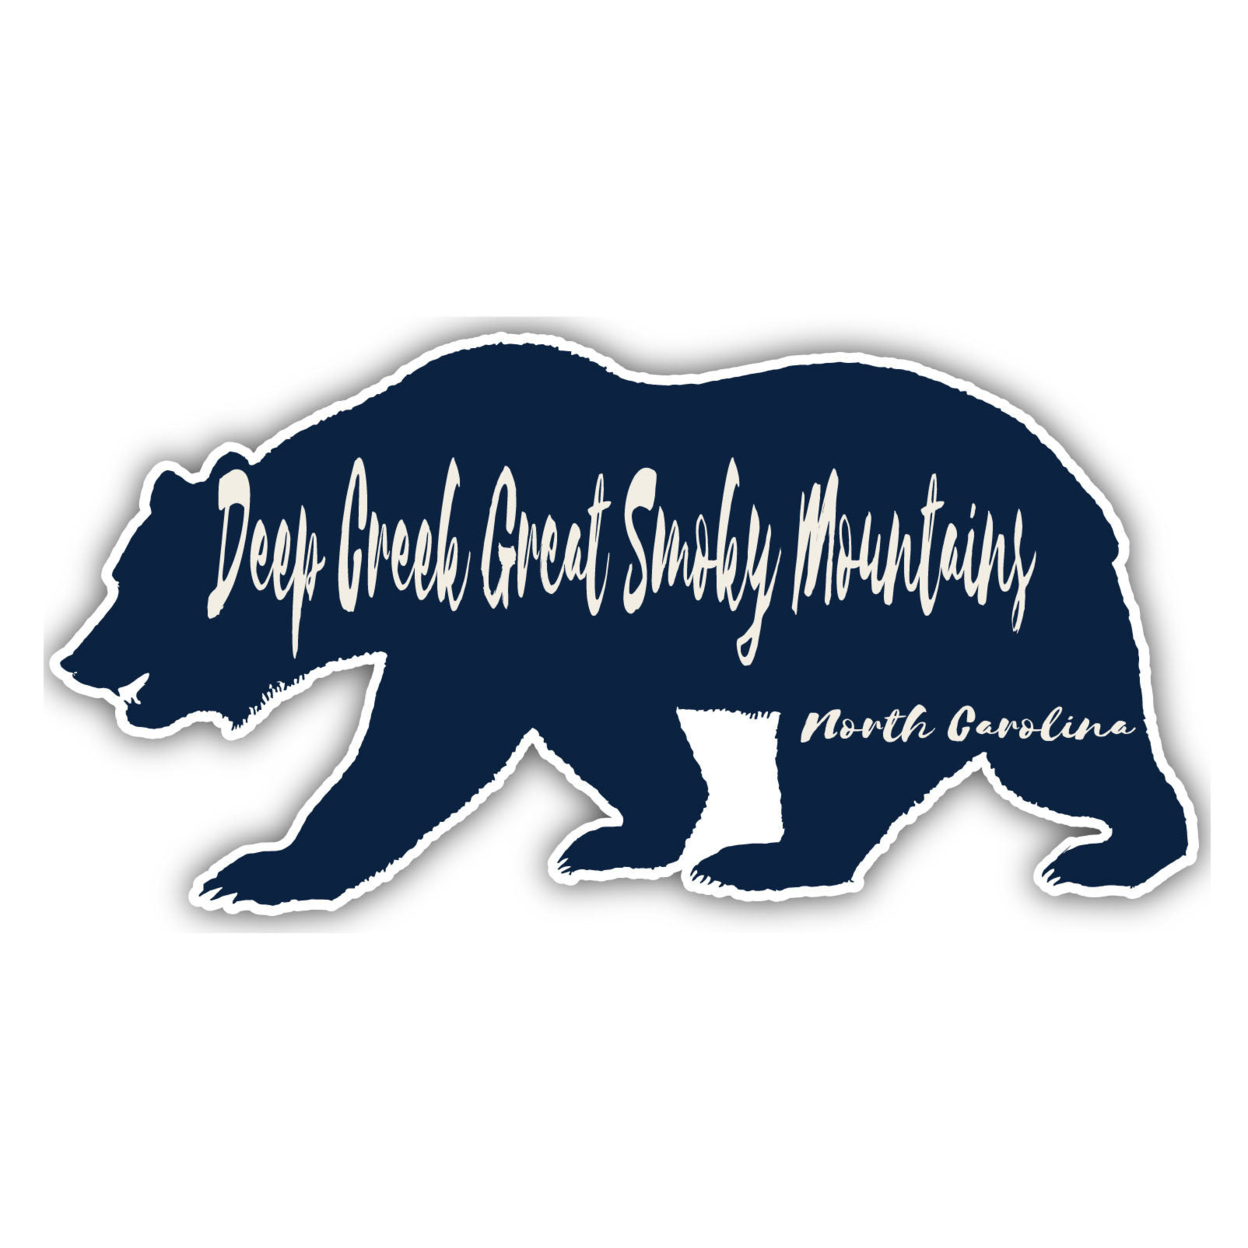 Deep Creek Great Smoky Mountains North Carolina Souvenir Decorative Stickers (Choose Theme And Size) - 4-Pack, 4-Inch, Bear